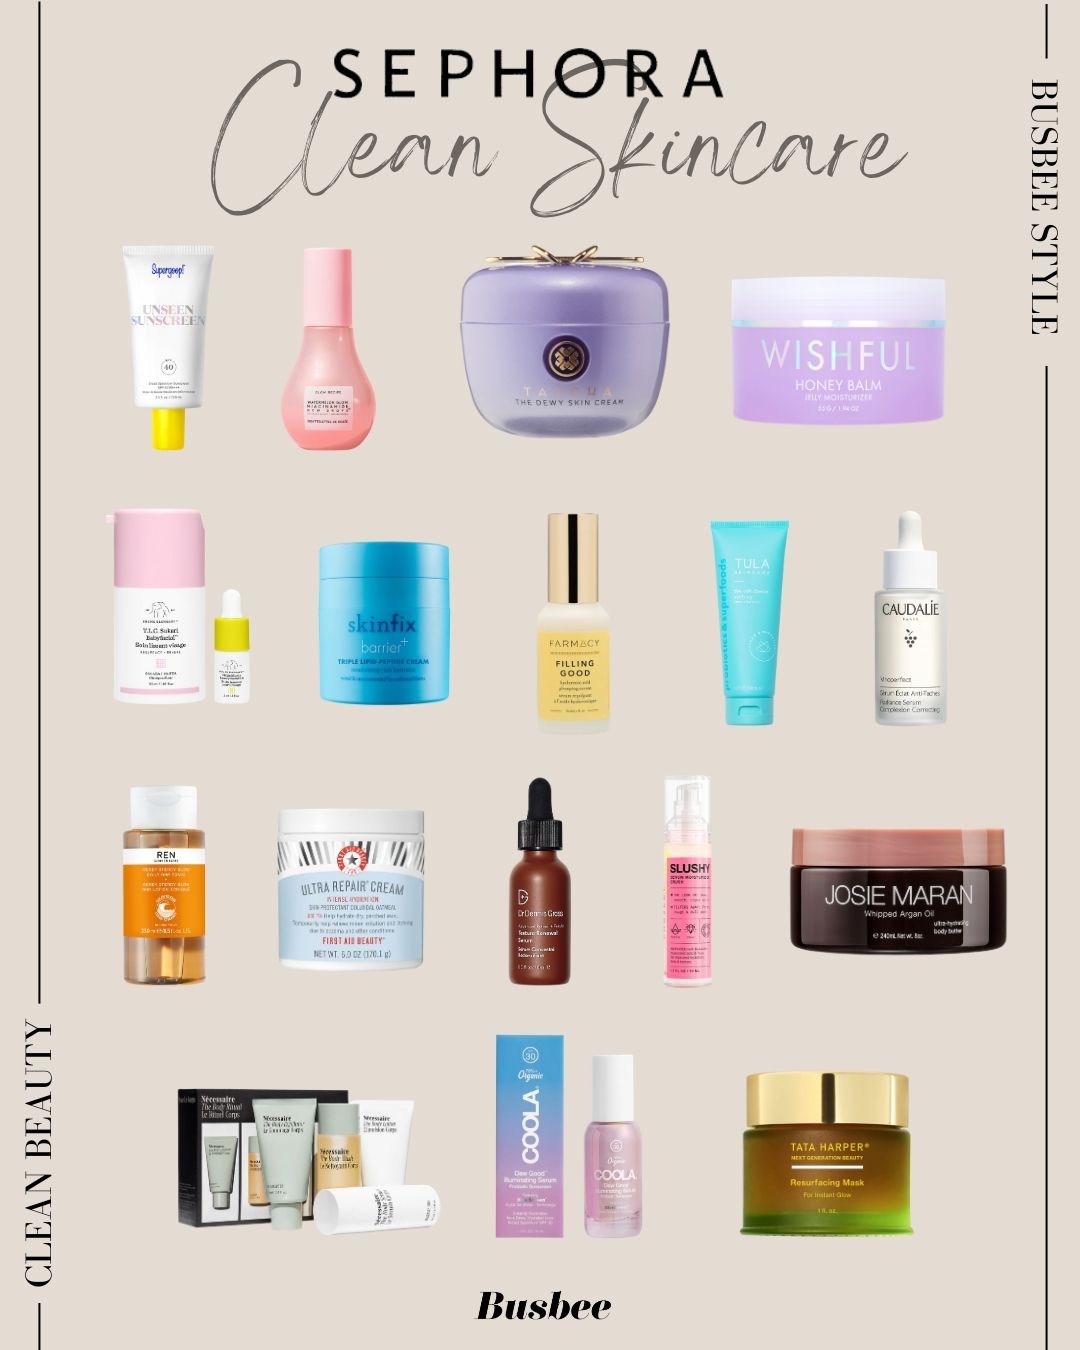 Sephora Clean skincare products